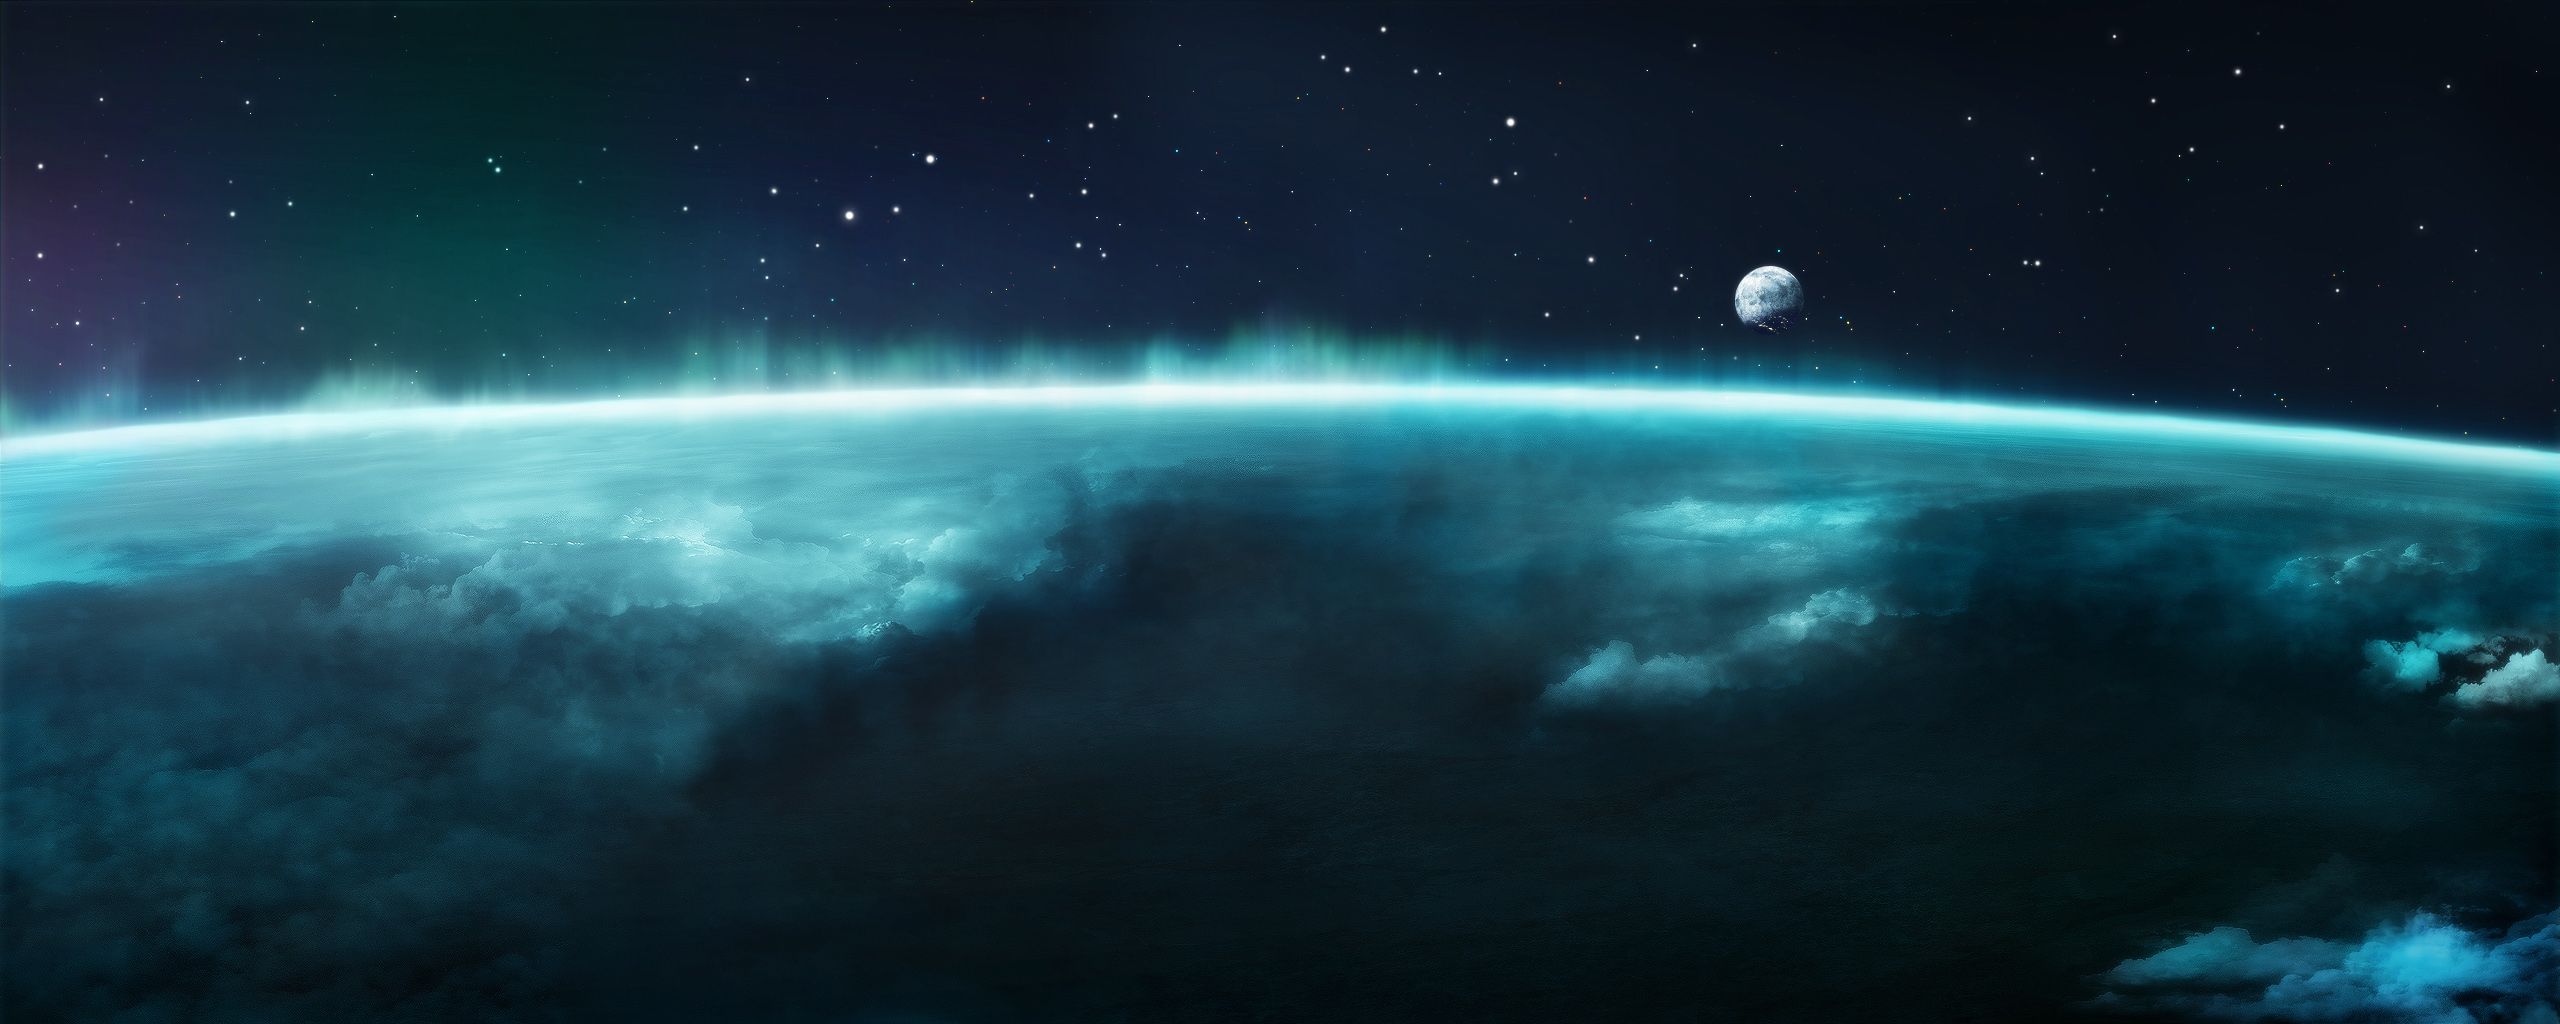 119 Sci Fi HD Wallpapers | Backgrounds - Wallpaper Abyss